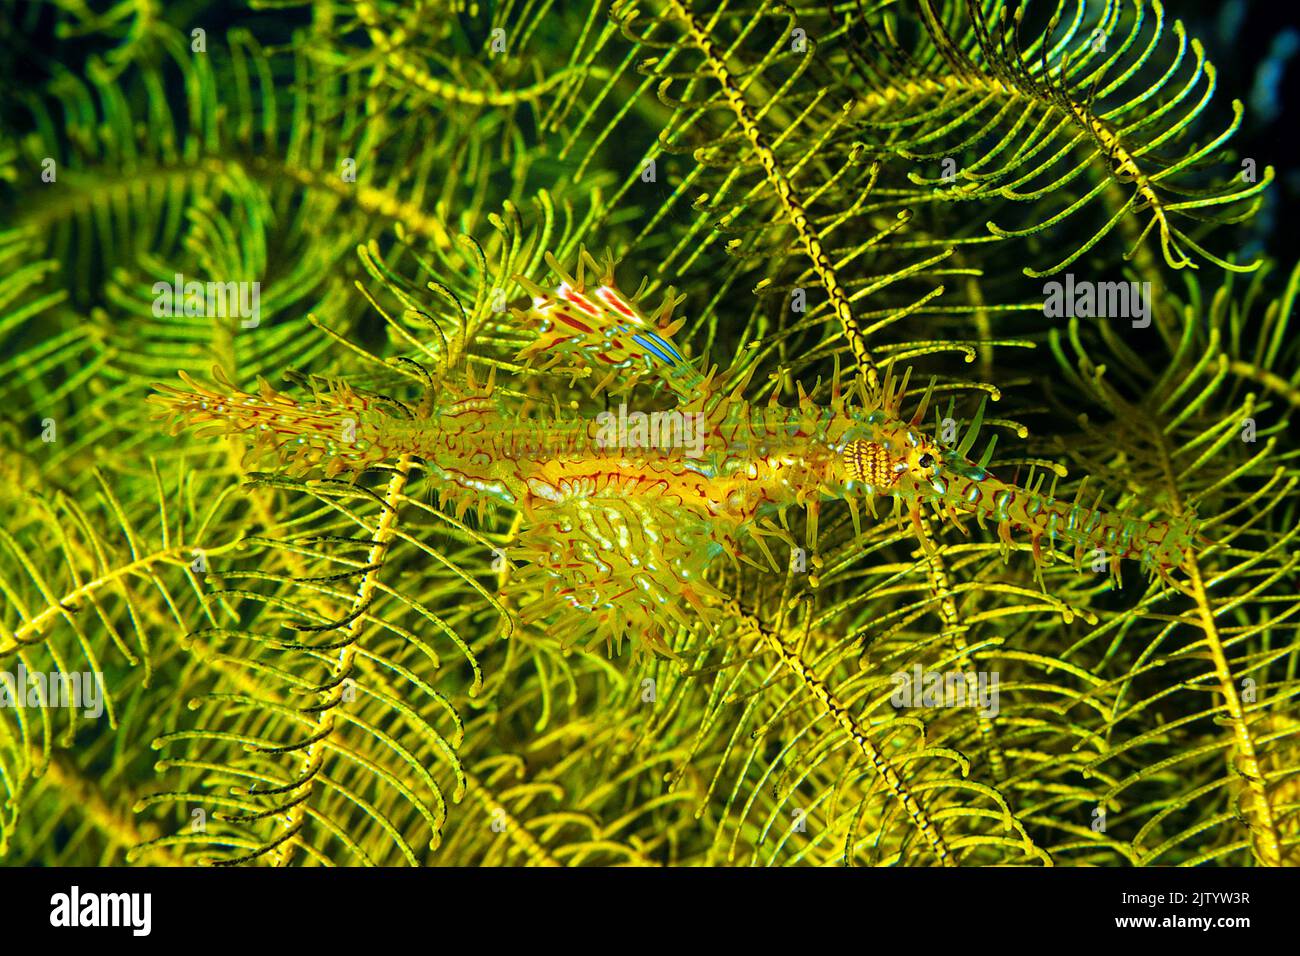 Ornate ghost pipefish or Harlequin ghost pipefish (Solenostomus paradoxus), at a feather star (Crinoidea), Ari Atoll, Maldives, Indian Ocean, Asia Stock Photo